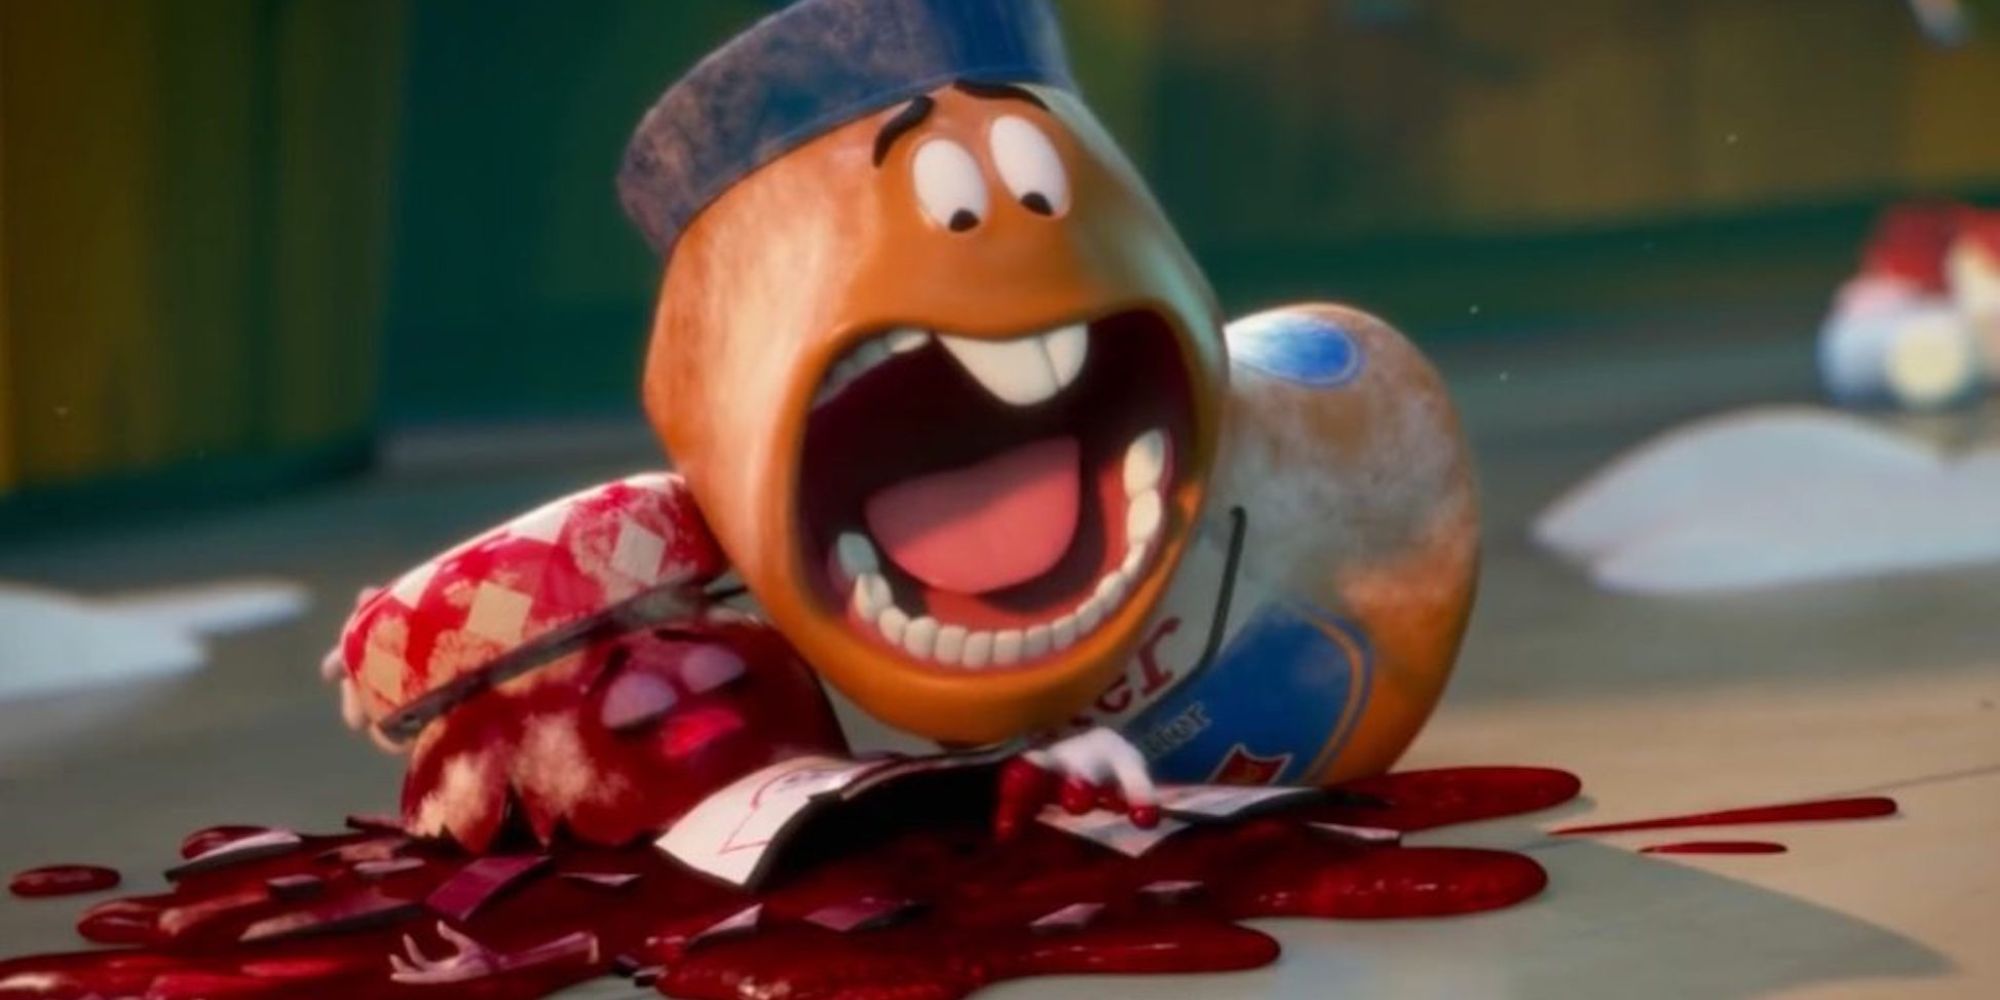 A peanut butter jar cries over a shattered jelly jar